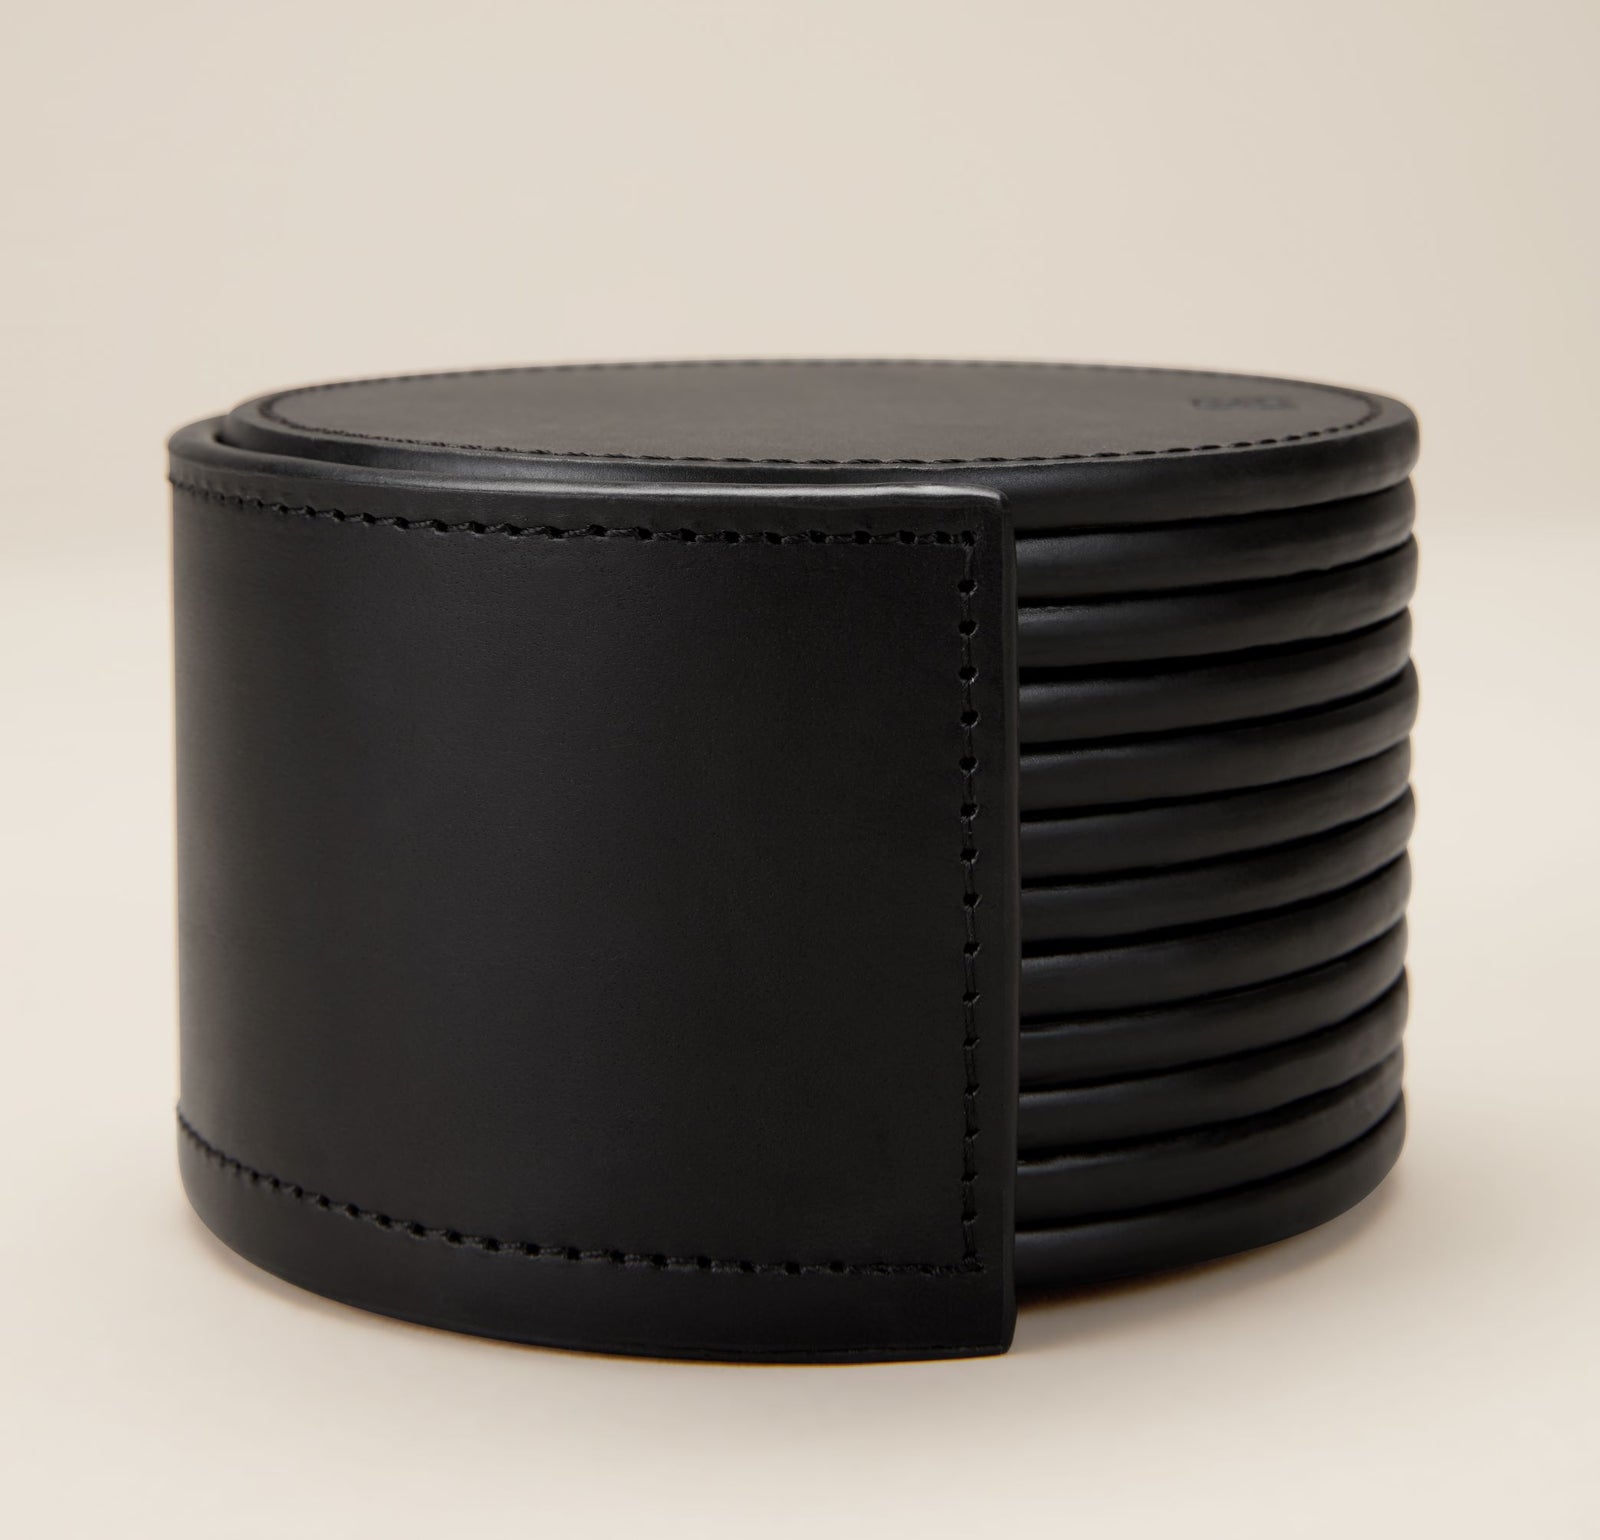 Leather Coasters in Holder (set of 12)